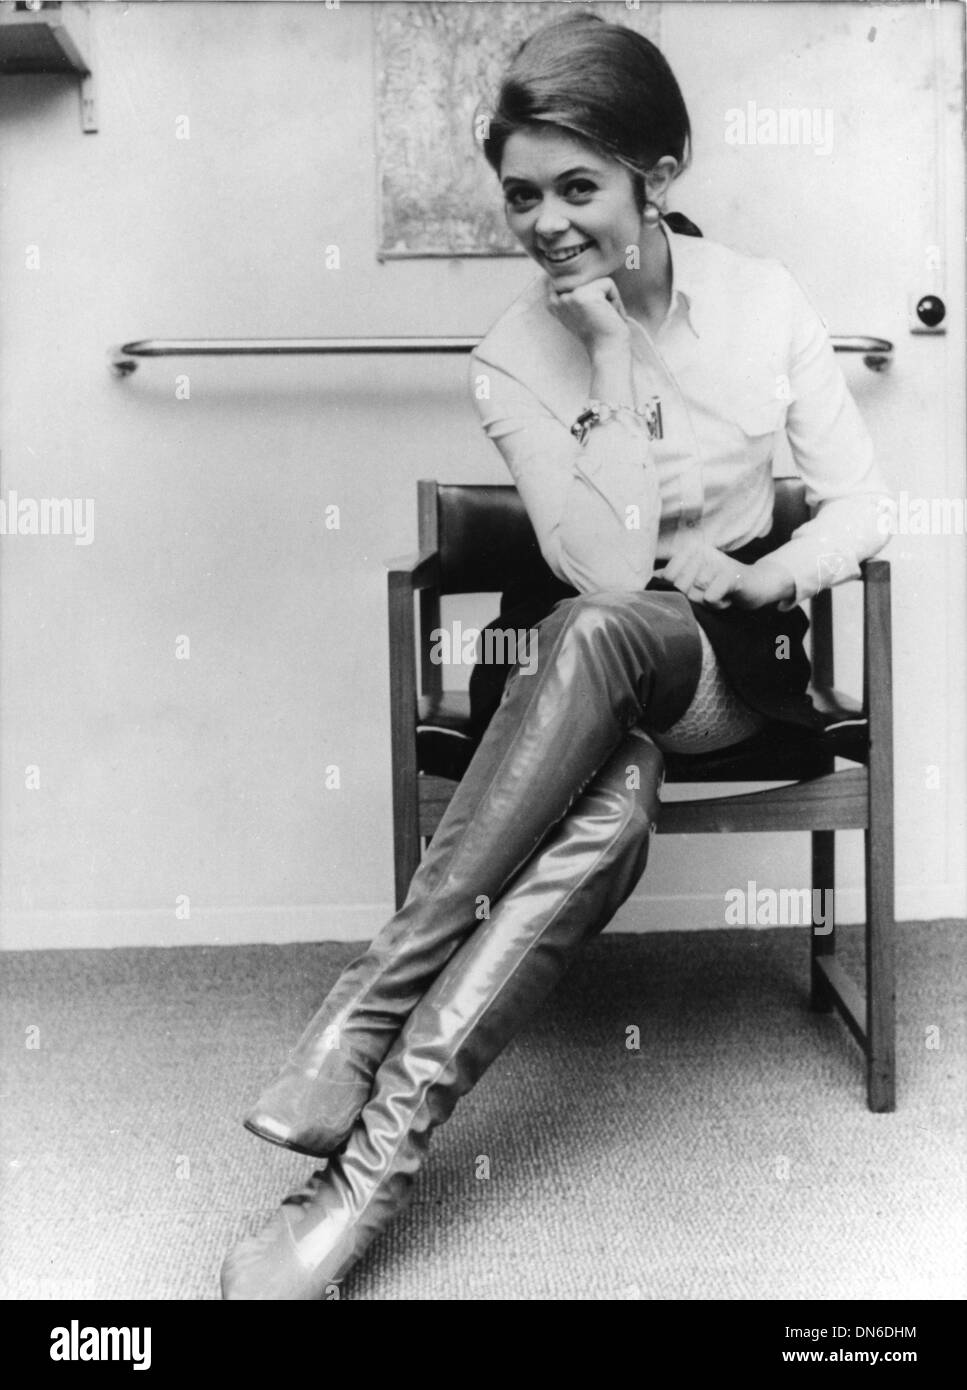 Jan. 21, 1969 - Singer WENCKE MYHRE sits in a mini-skirt and over the knee boots. Stock Photo